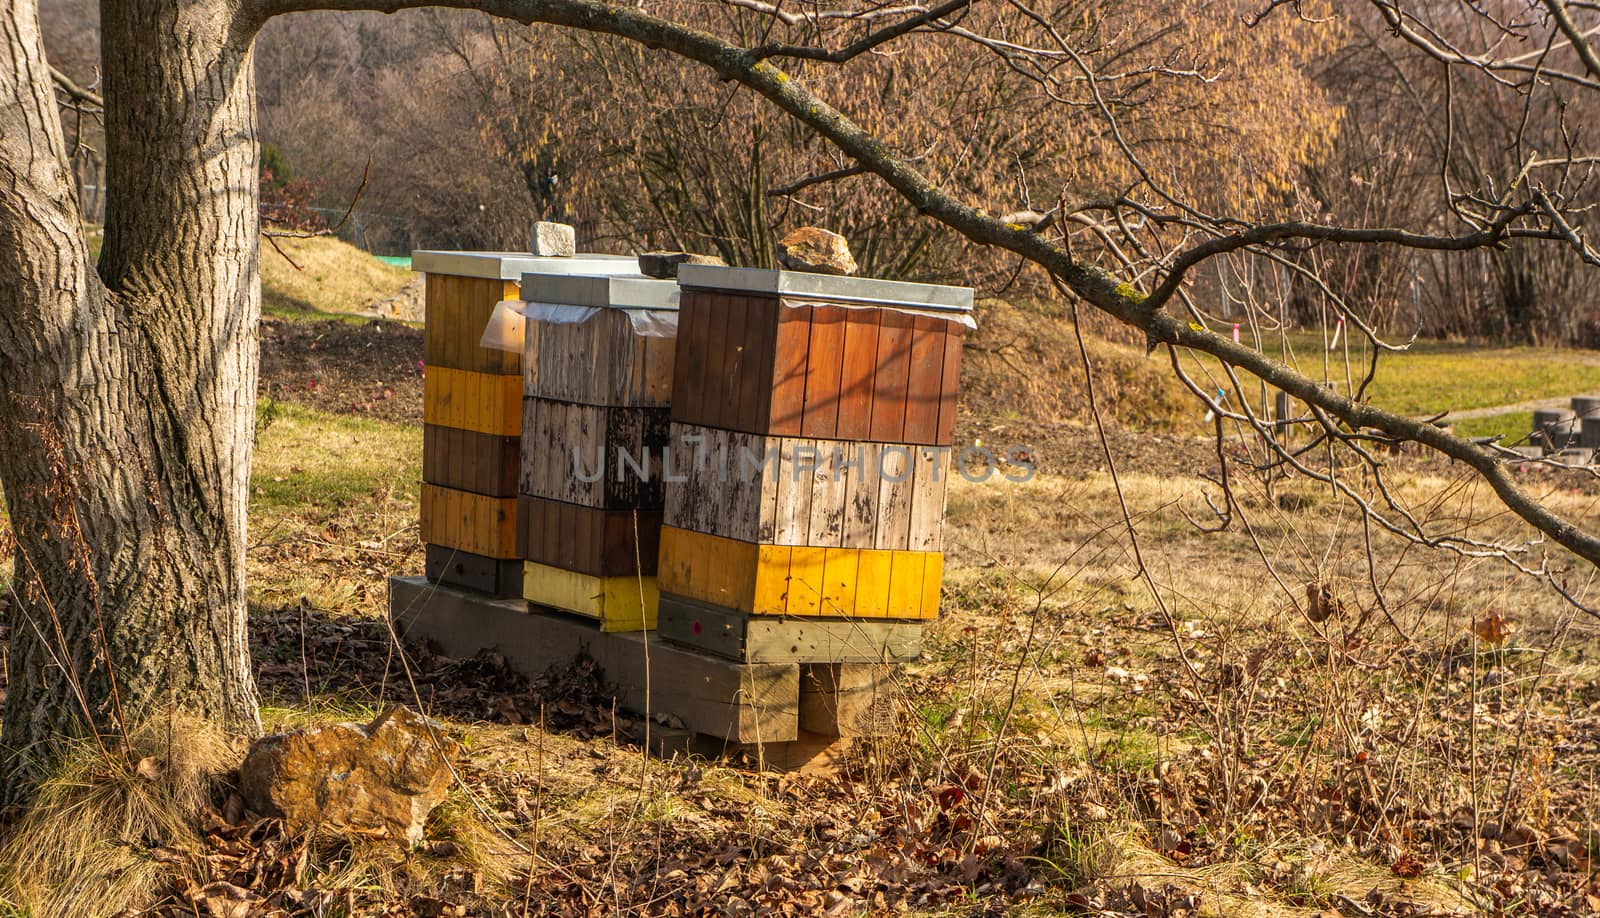 Beehives under a lrage tree in the Botanical gardens, Troja, Prague. Fall themed with dry leaves on the ground and soft orange sunlight.